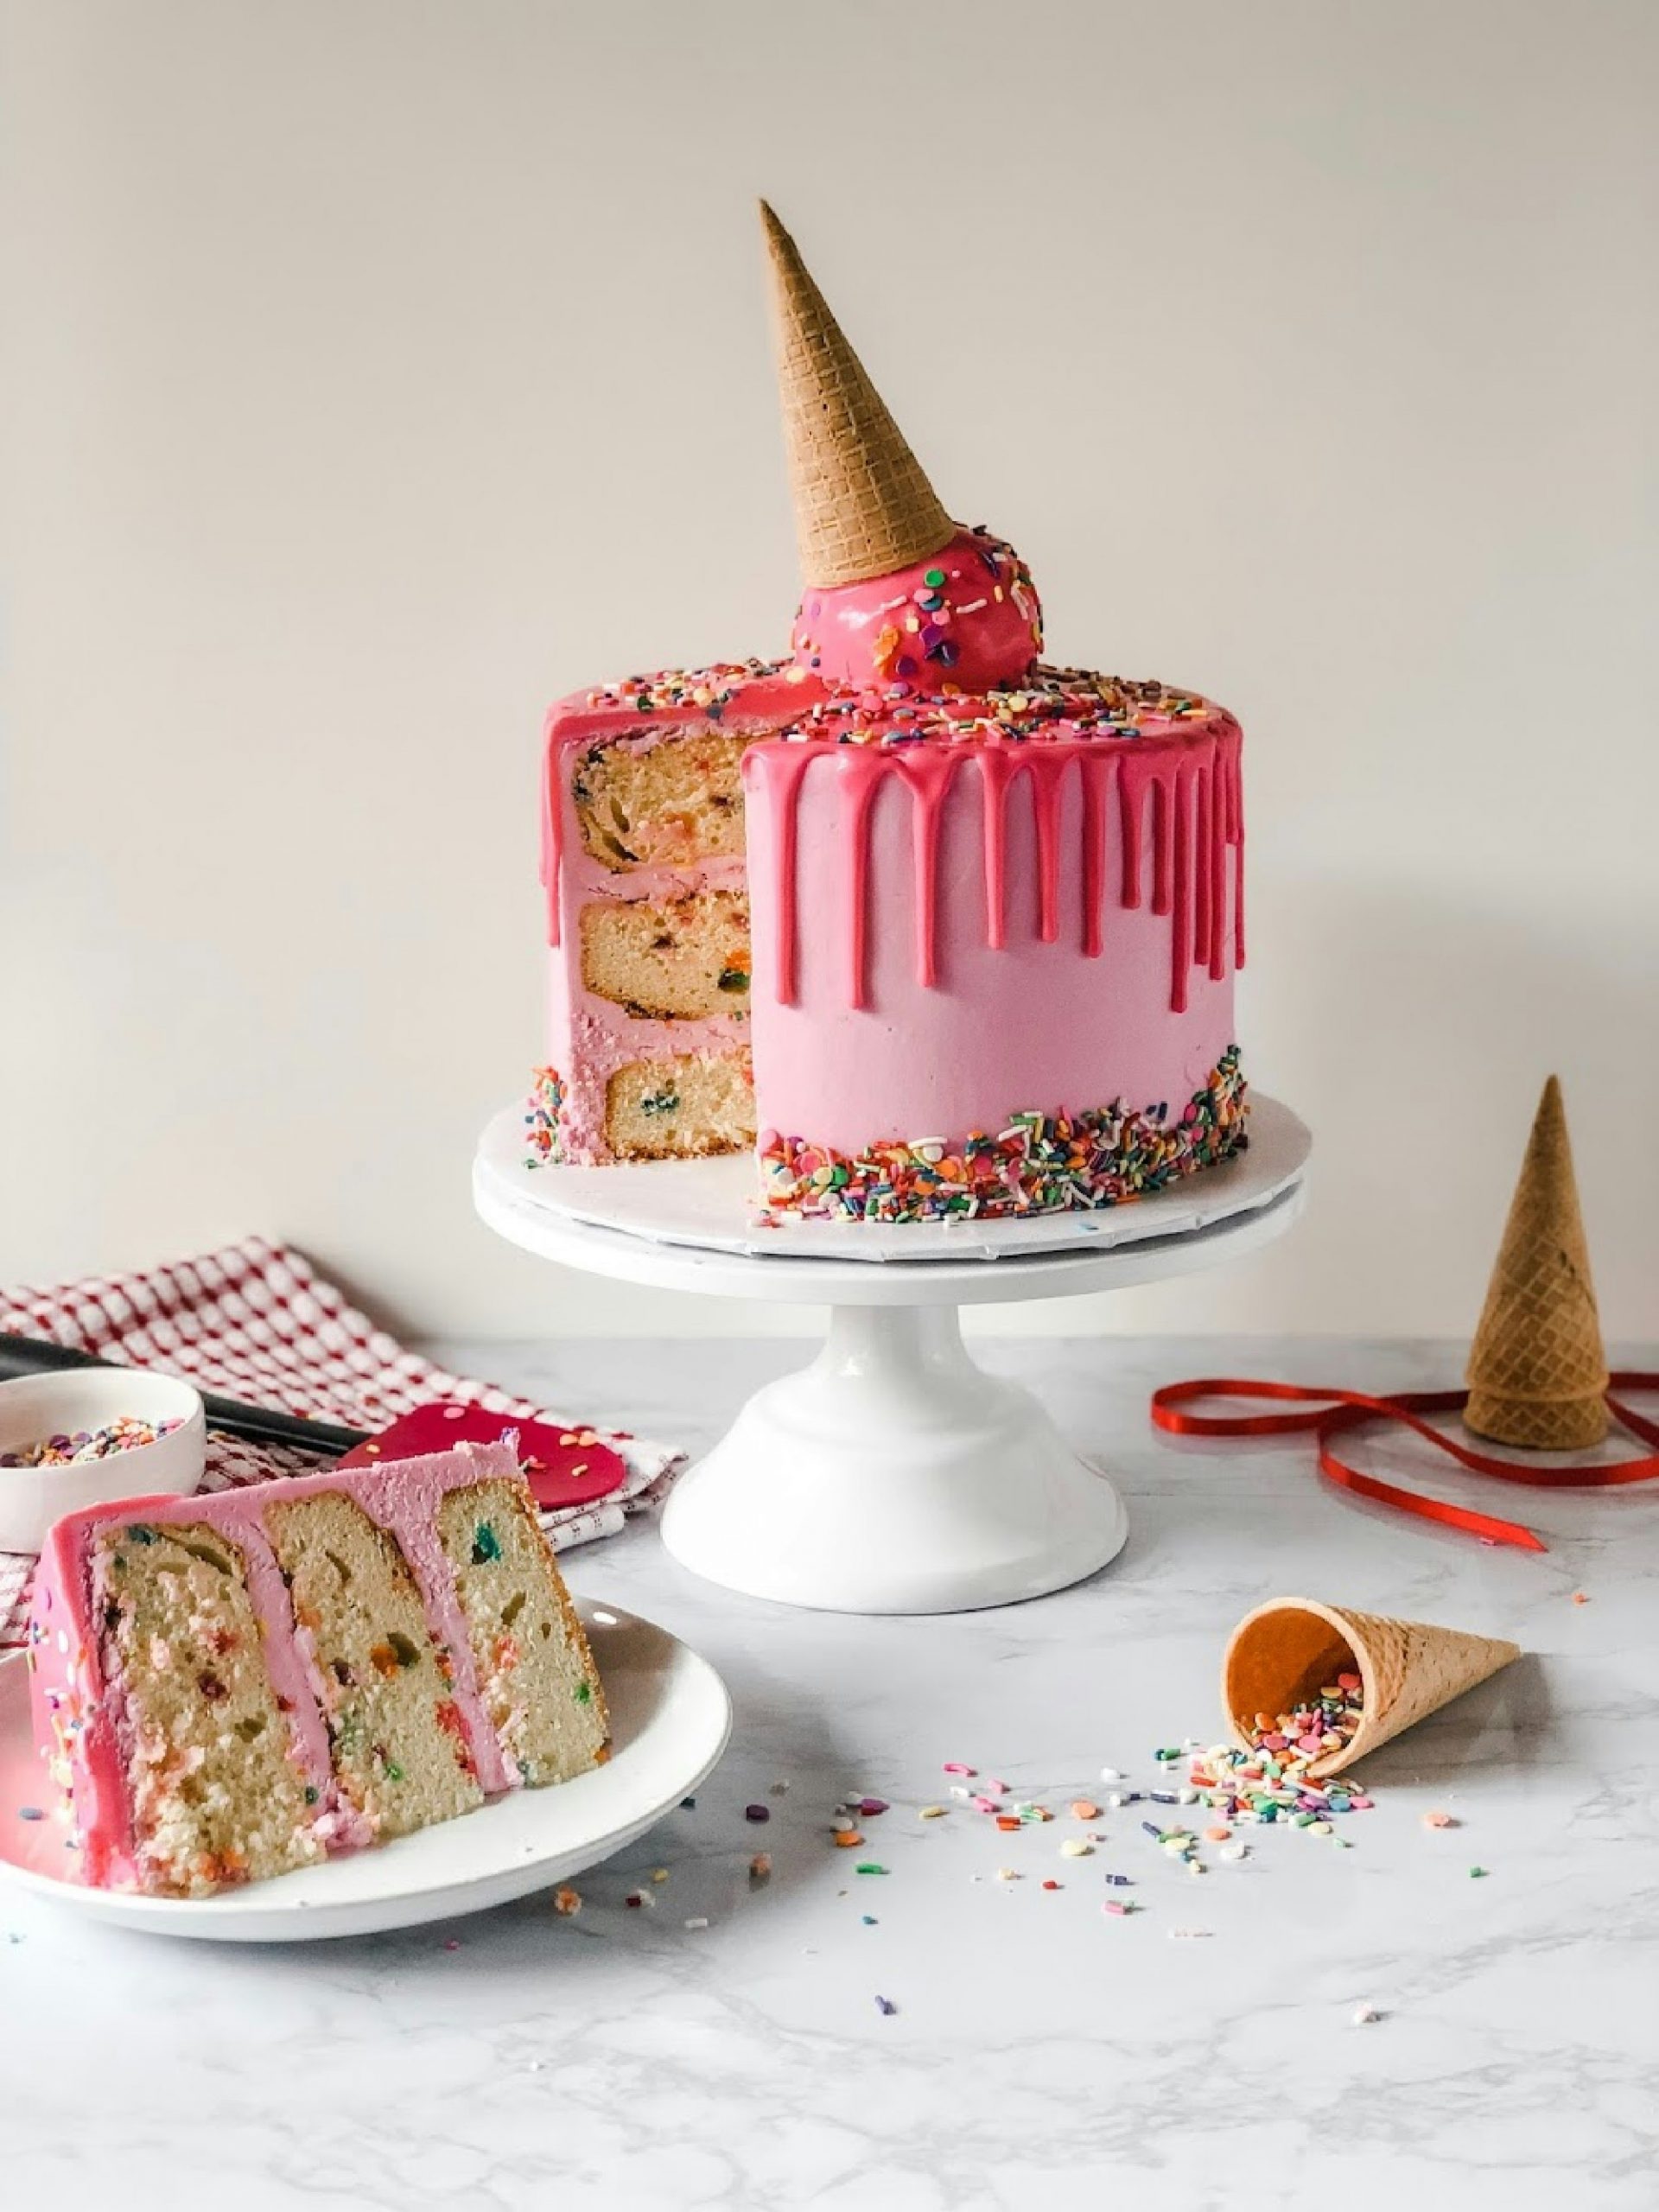 EEAT. A slice of cake on a plate, large cake on a stand with an ice cream cornet squashed into the top. Pink icing.